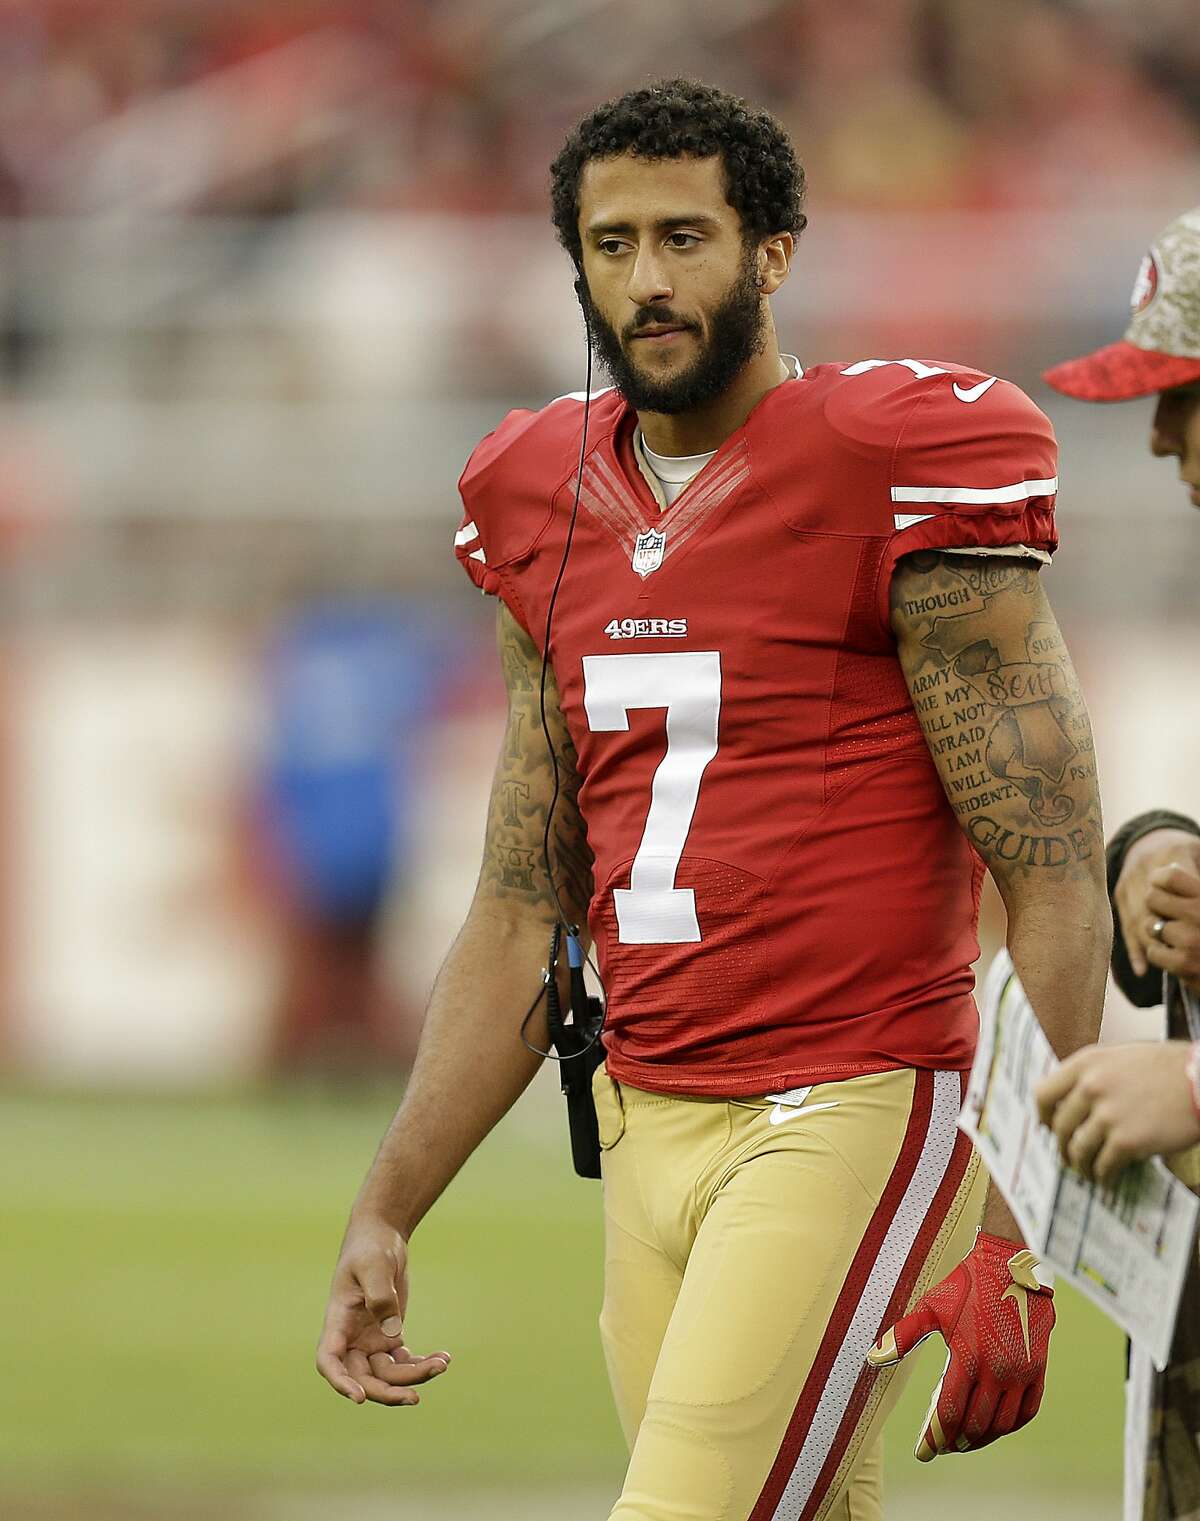 The Broncos have reportedly been working on restructuring Colin Kaepernick’s contract.